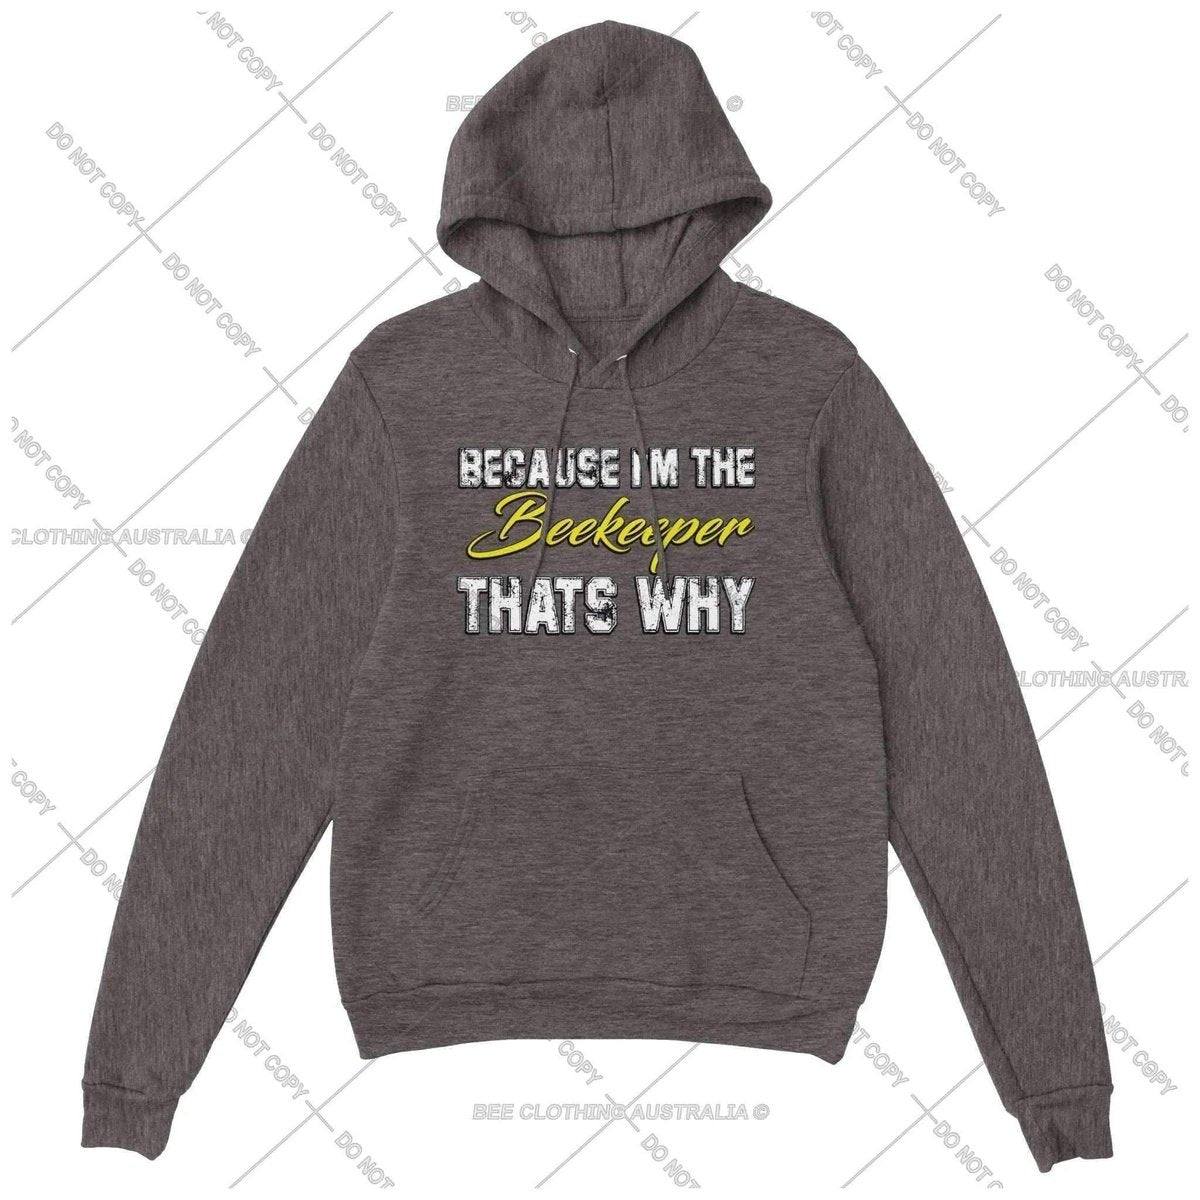 Because I'm the beekeeper that's why Hoodie - Premium Unisex Pullover Hoodie Australia Online Color